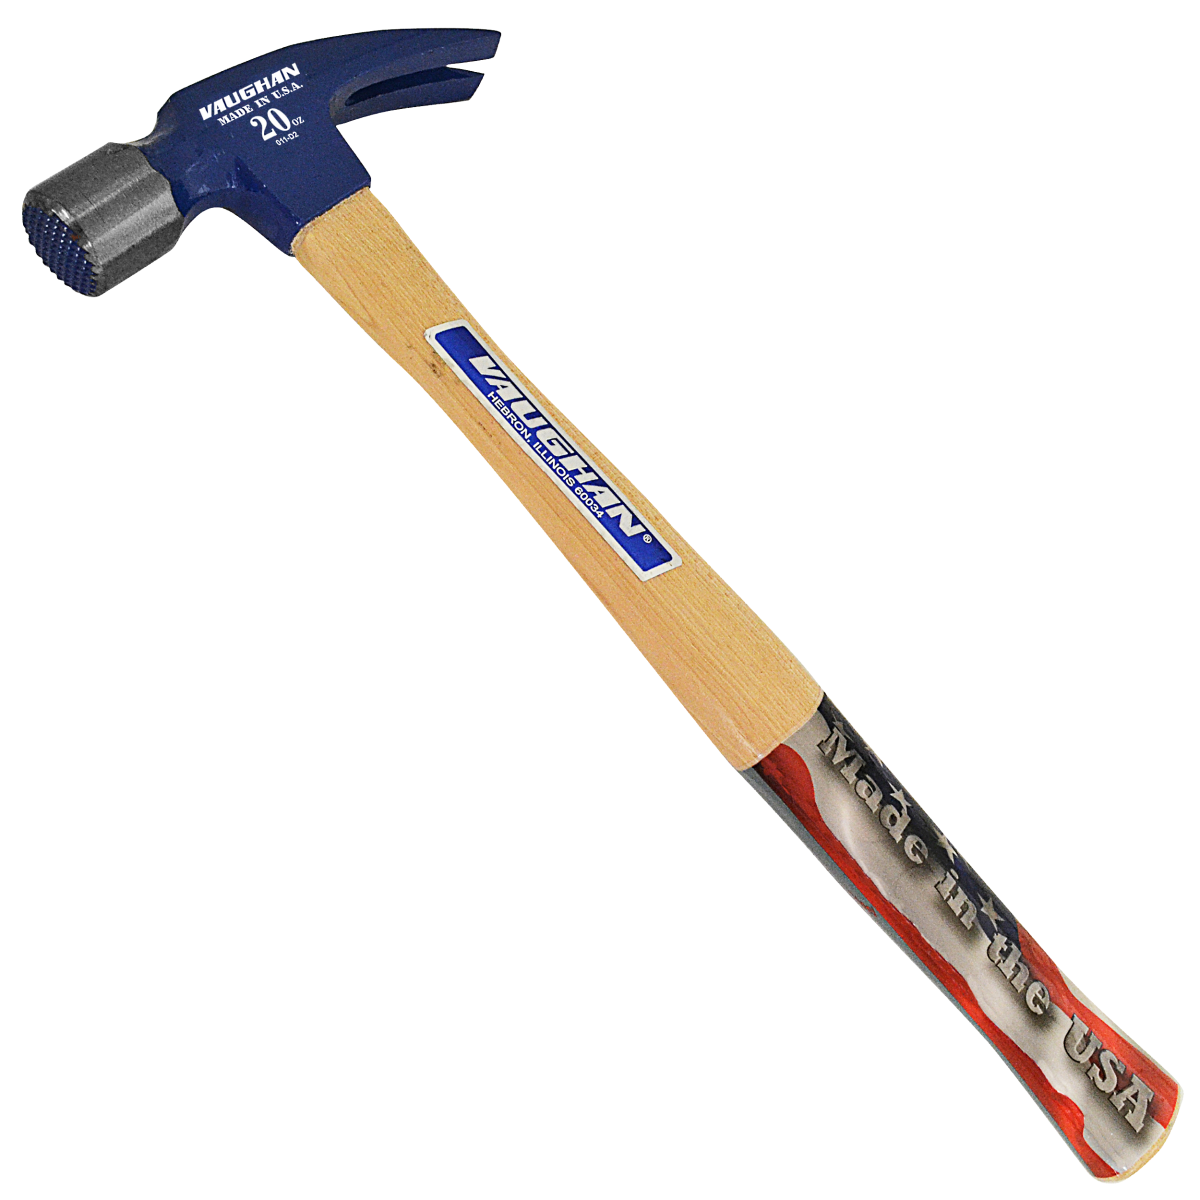 Vaughan 10530  20 oz. Rip Hammer 16" with Wood Handle